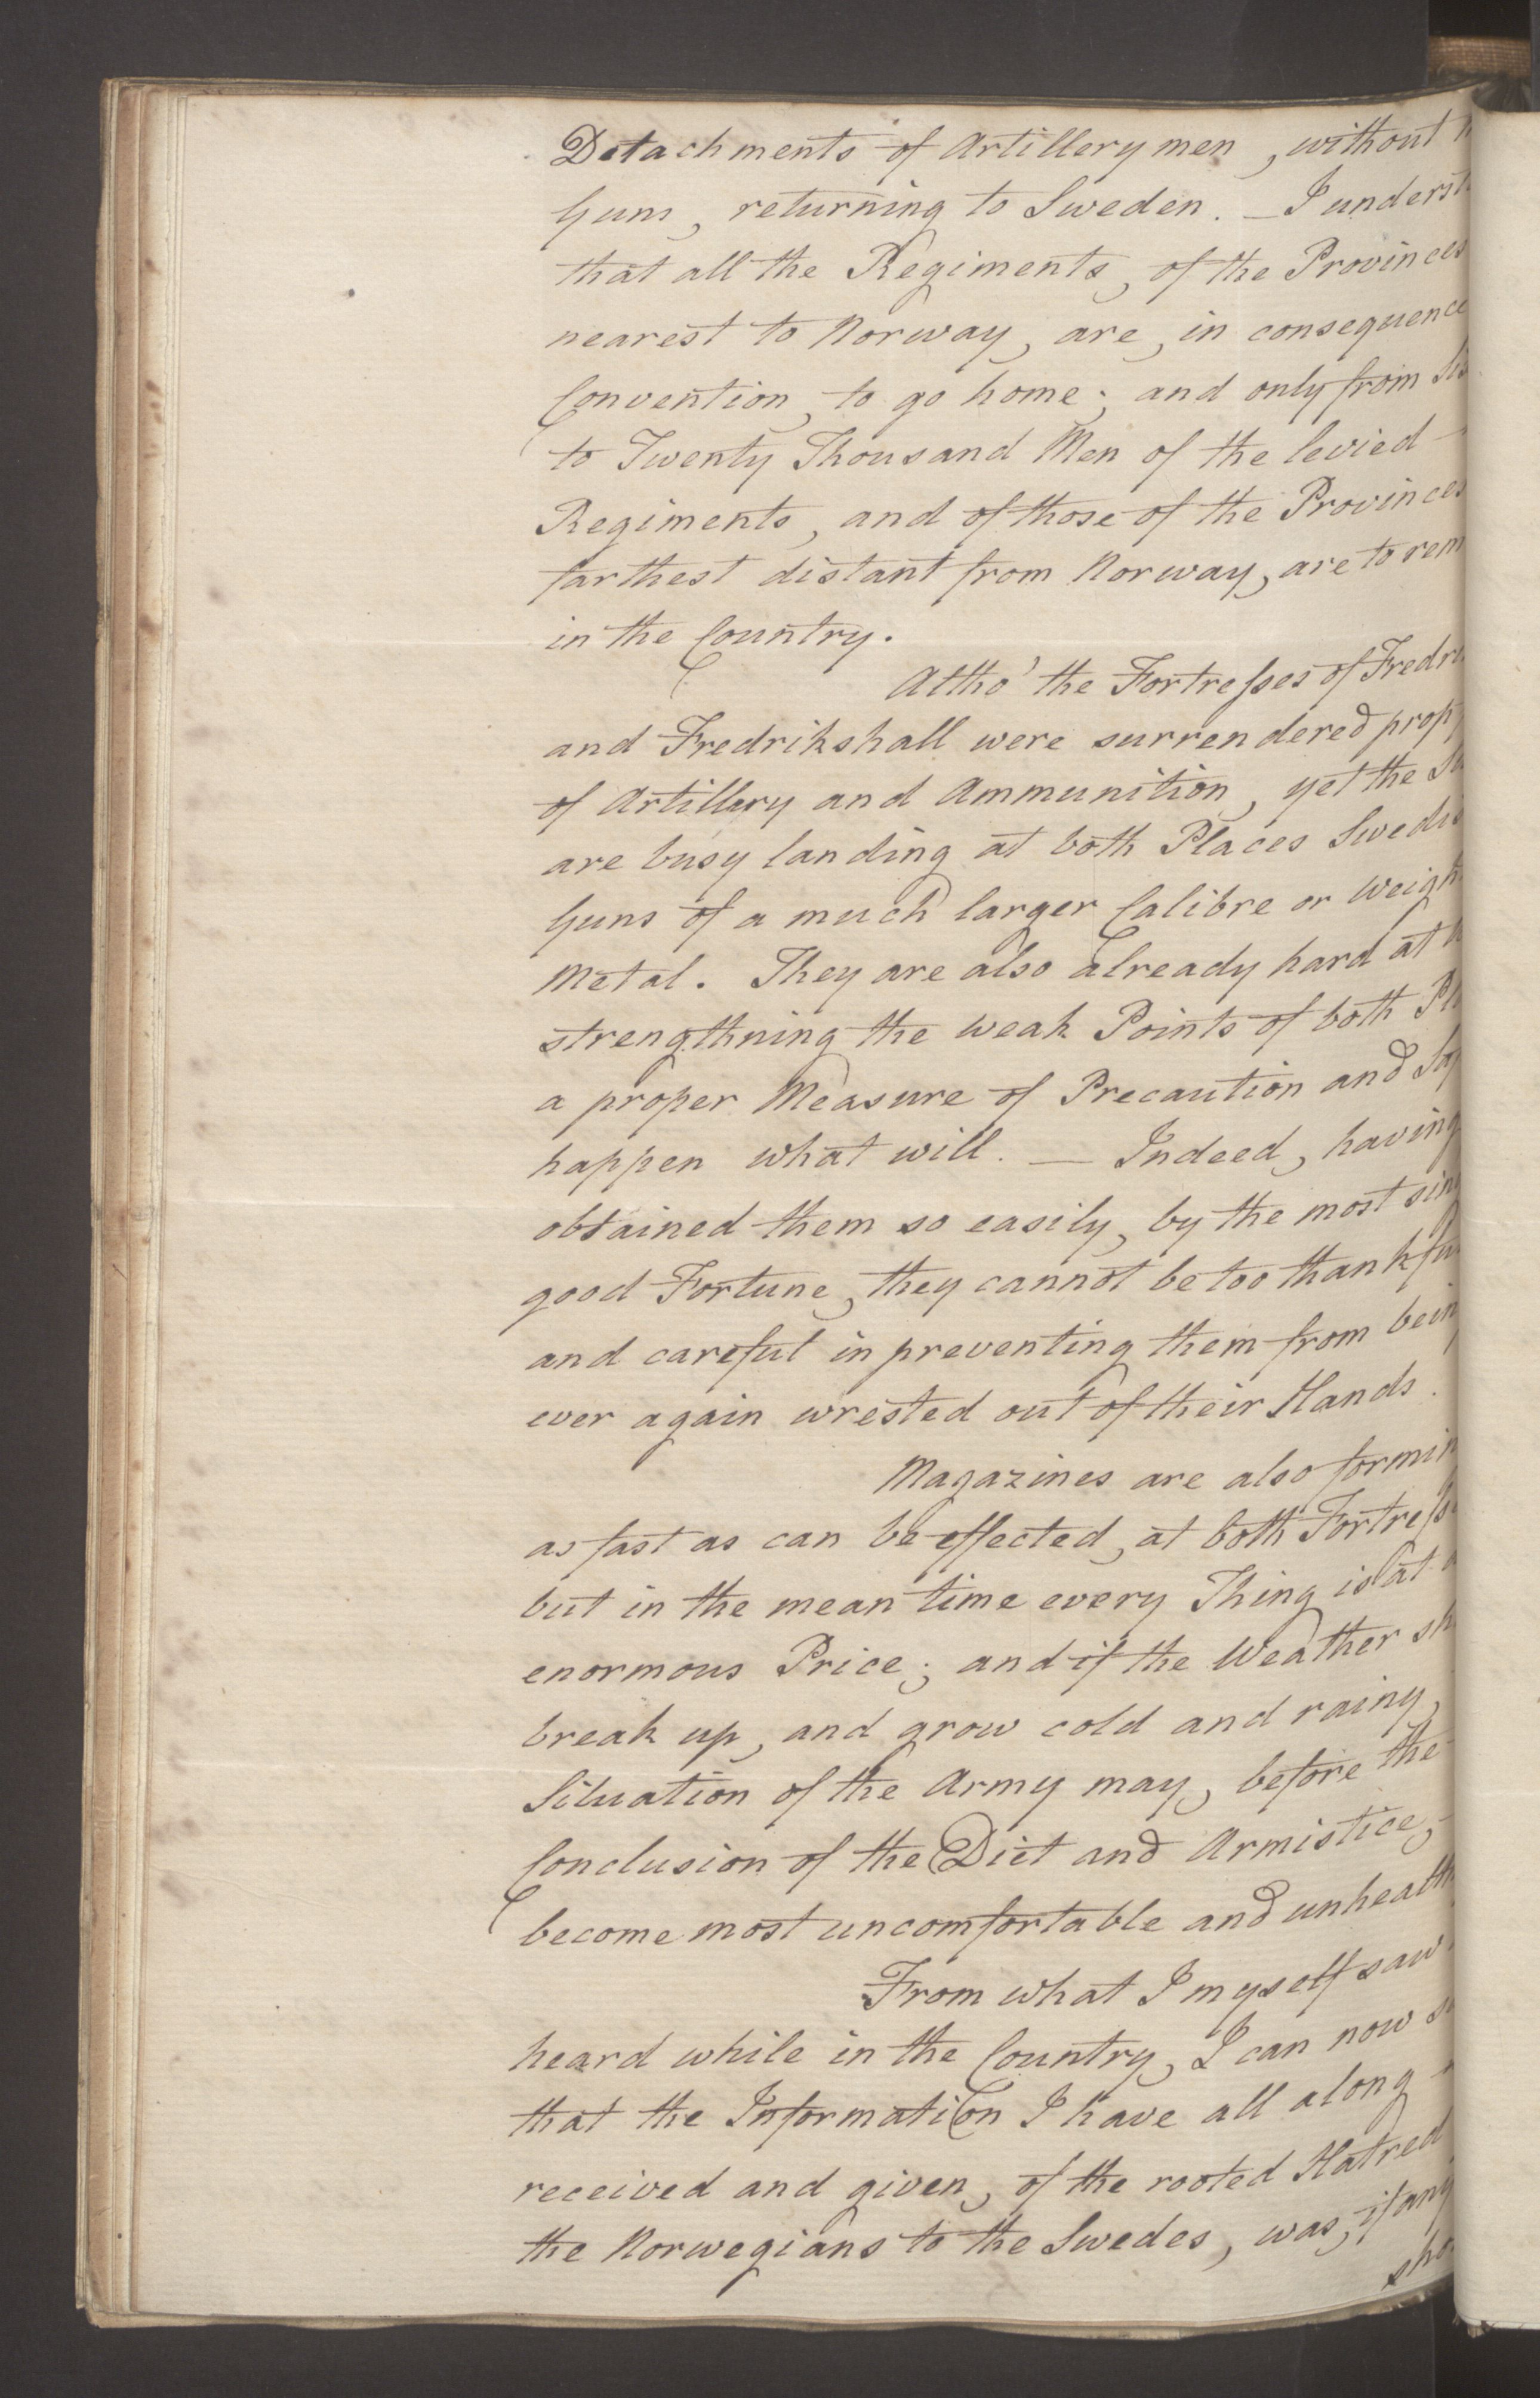 Foreign Office*, UKA/-/FO 38/16: Sir C. Gordon. Reports from Malmö, Jonkoping, and Helsingborg, 1814, p. 108